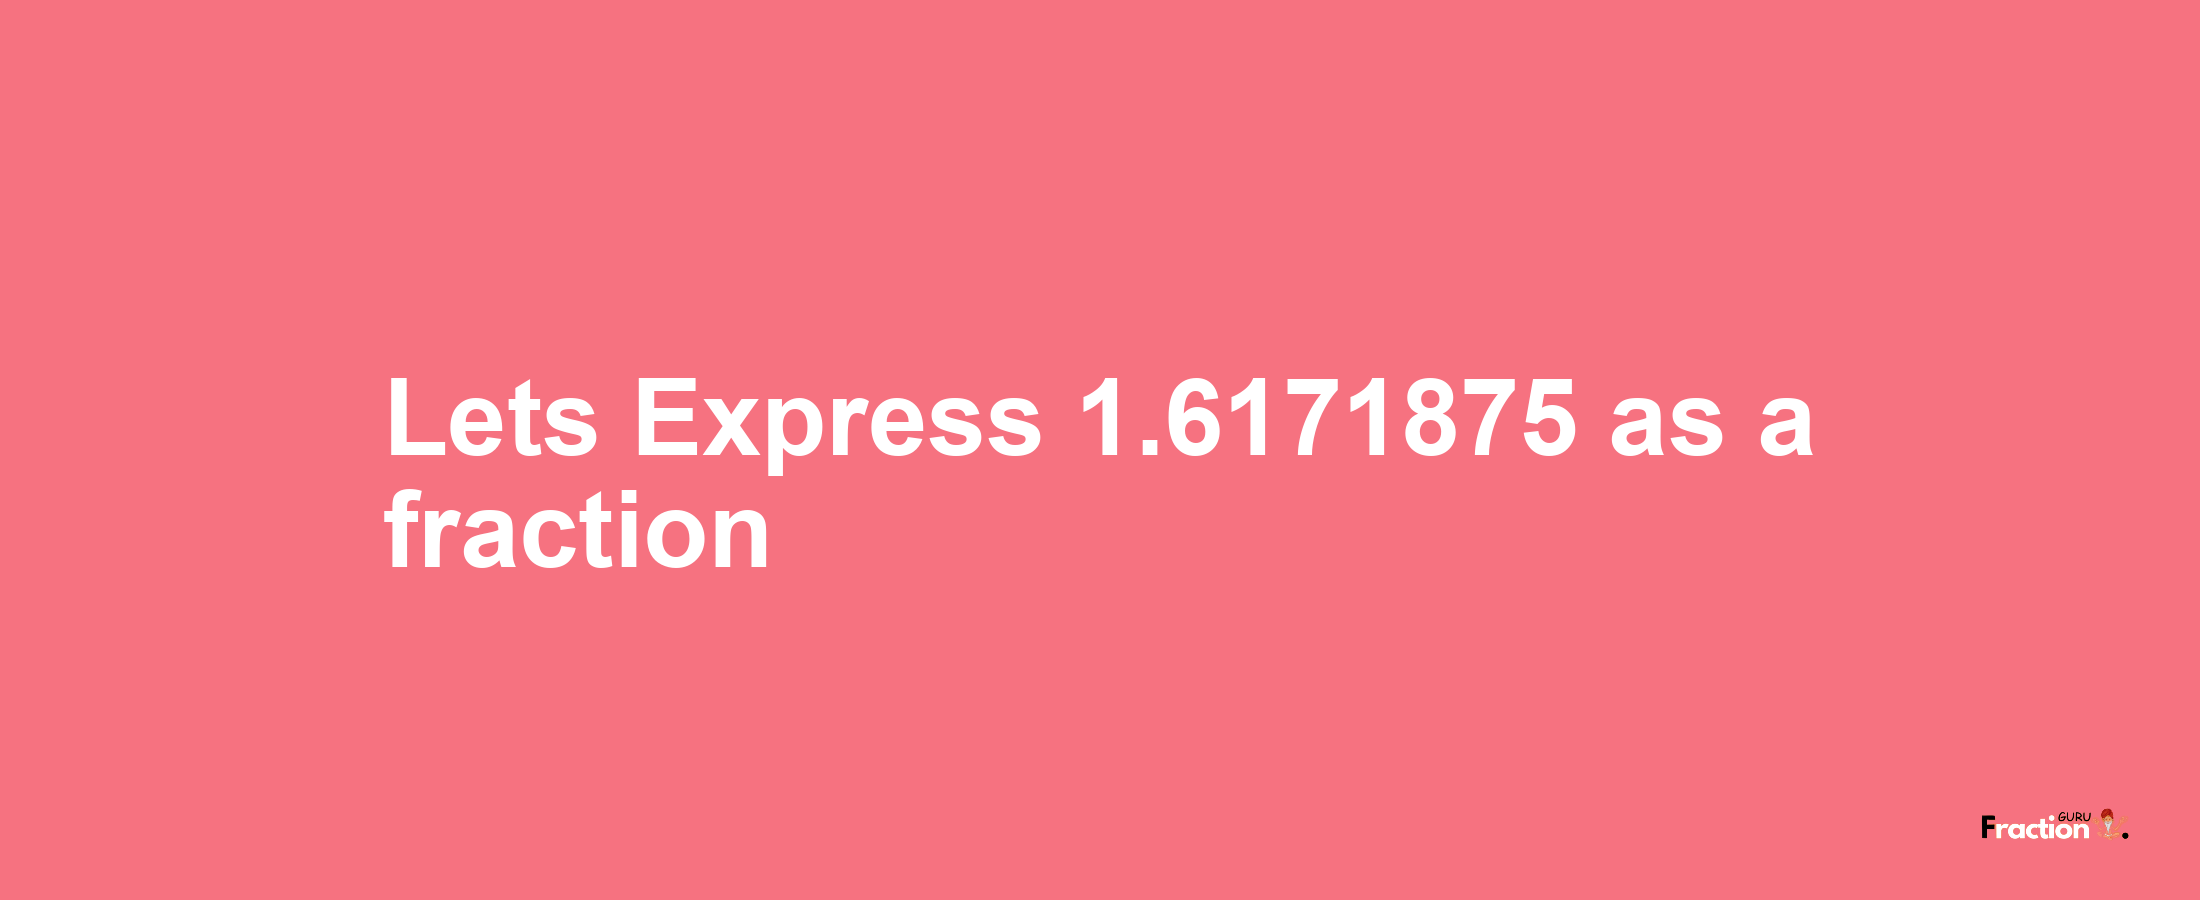 Lets Express 1.6171875 as afraction